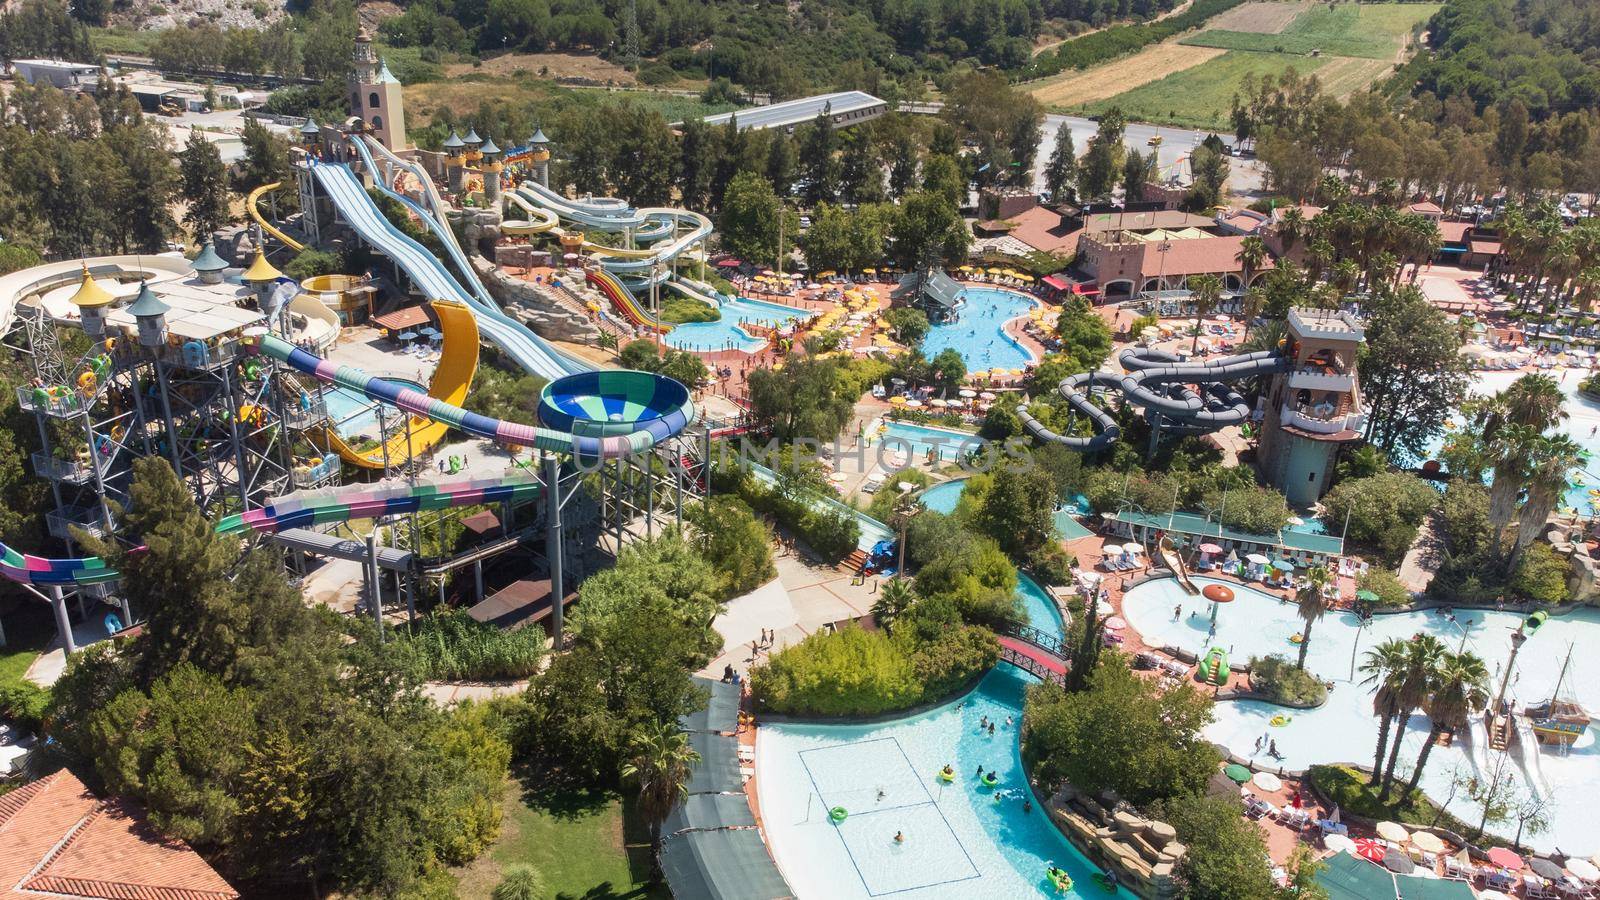 aerial image of a large Water park with various slides and pools by senkaya